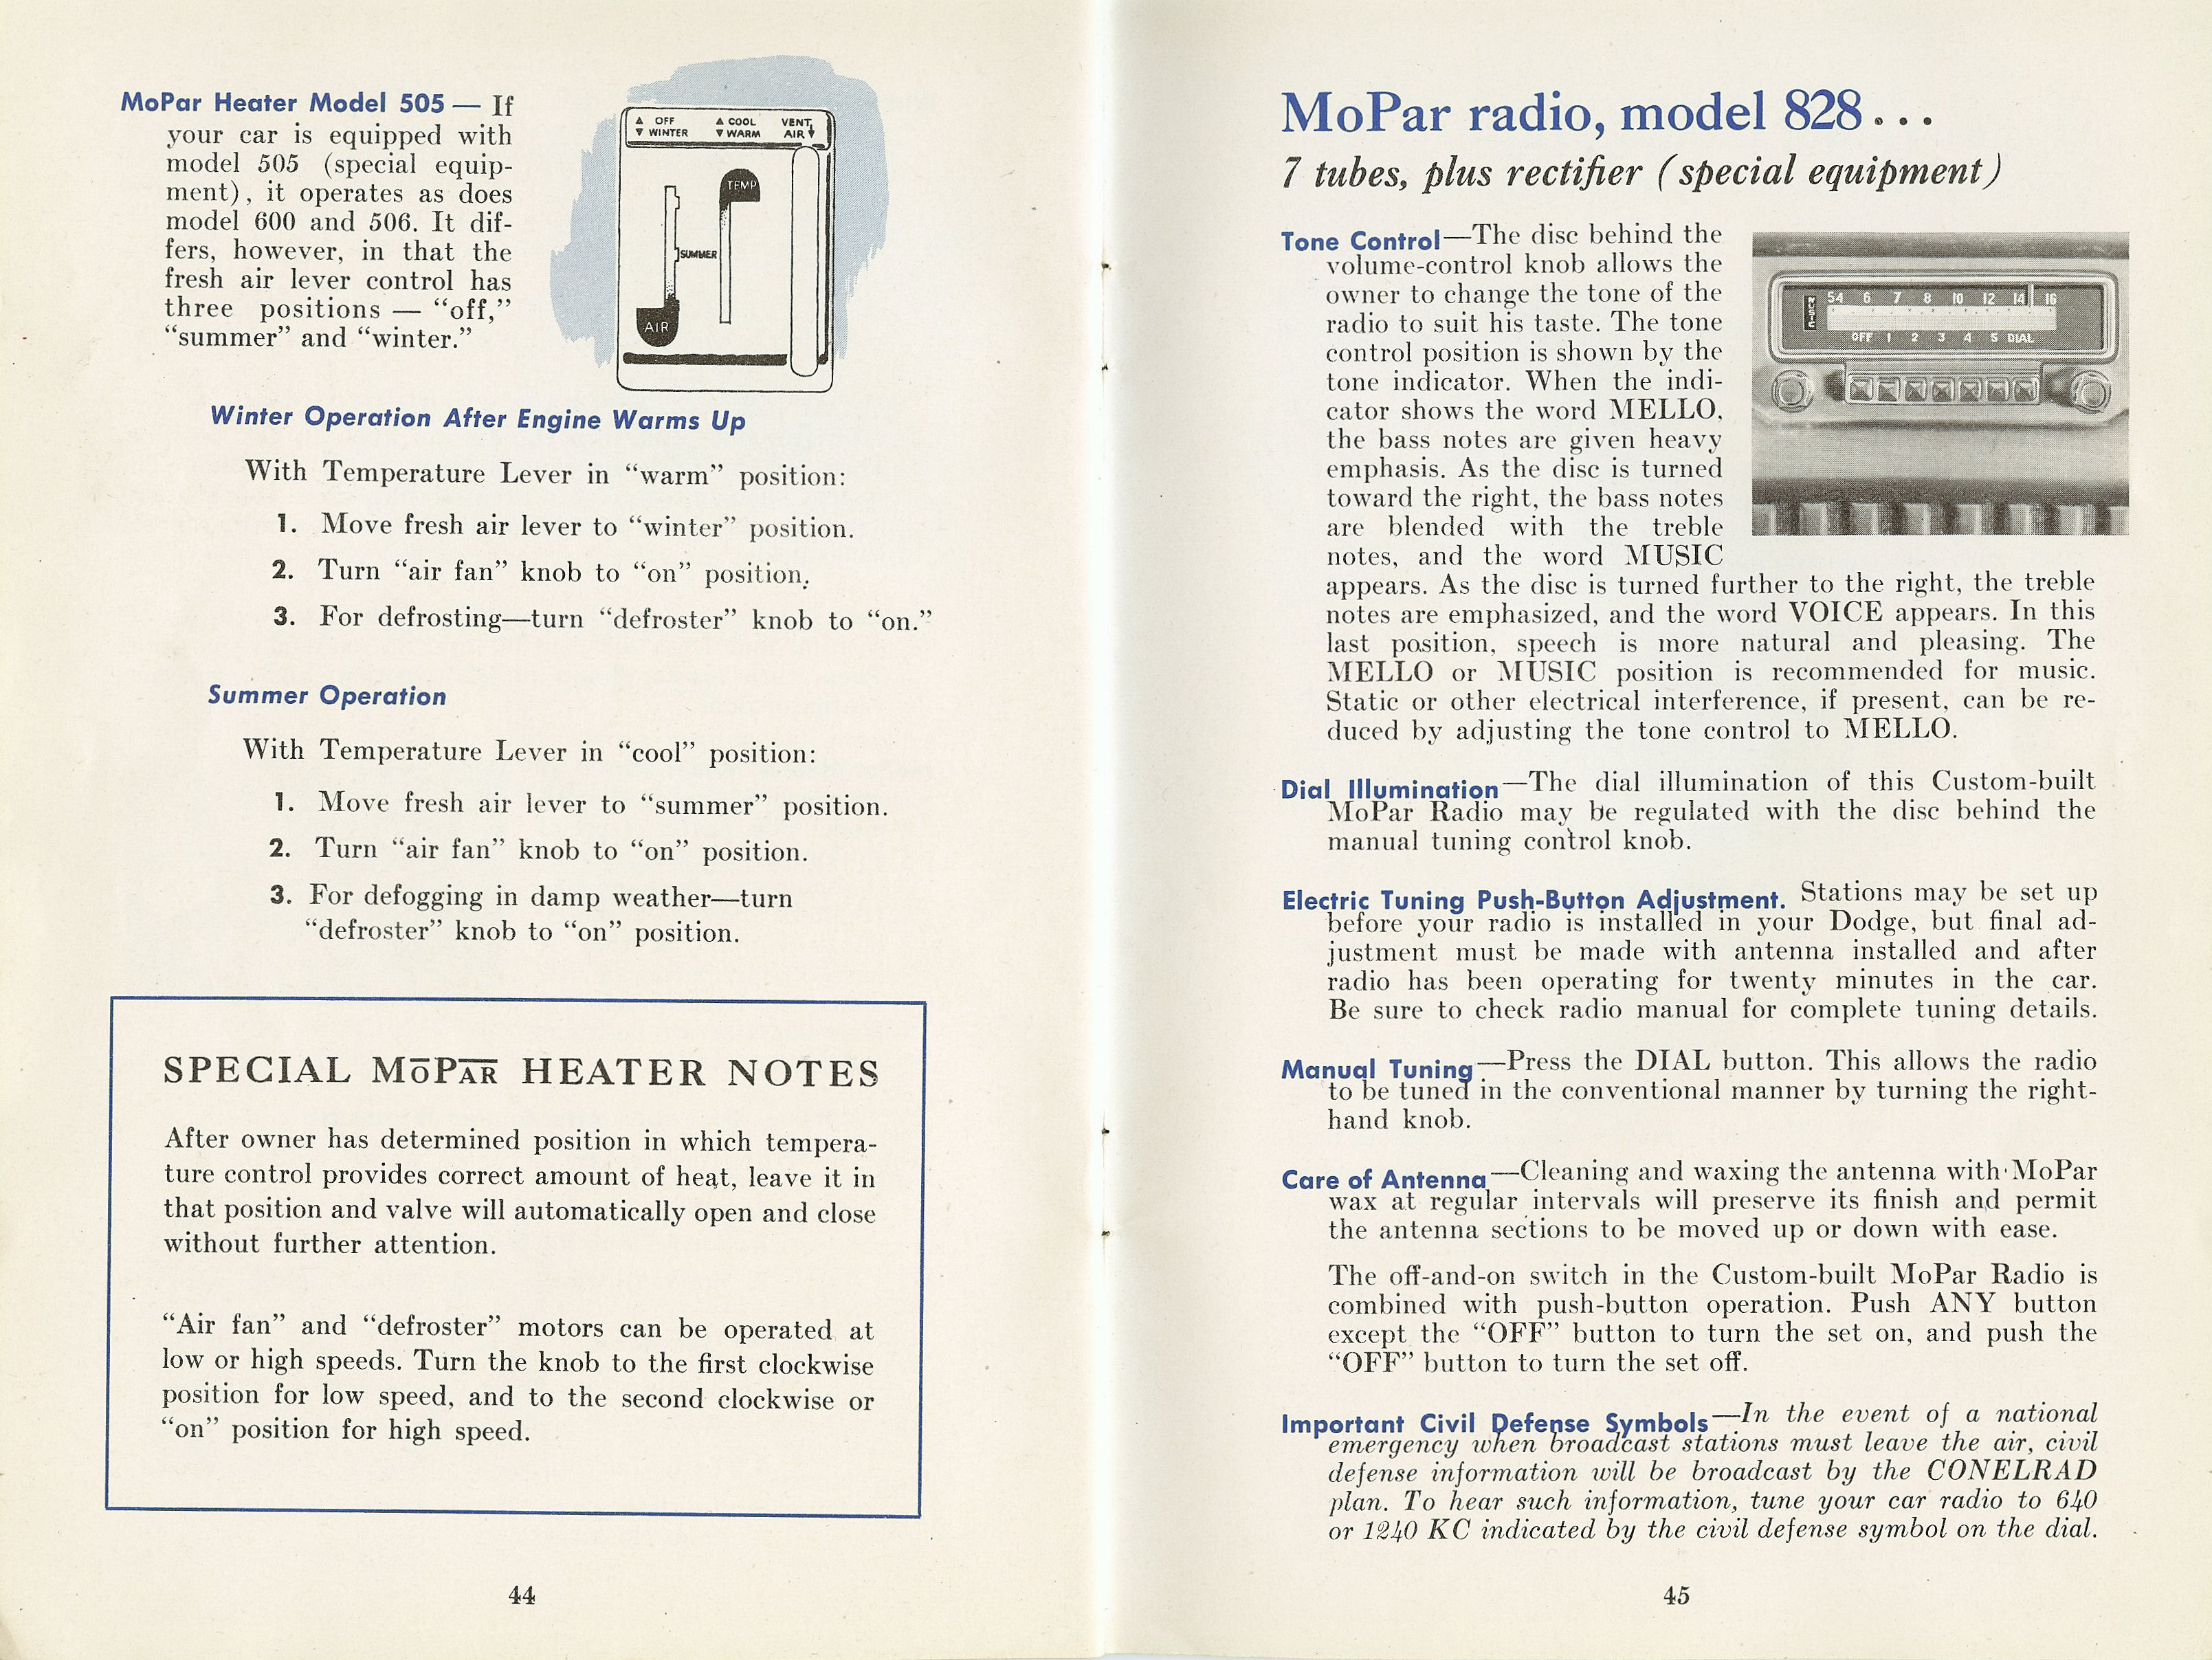 1954_Dodge_Owners_Manual-44-45